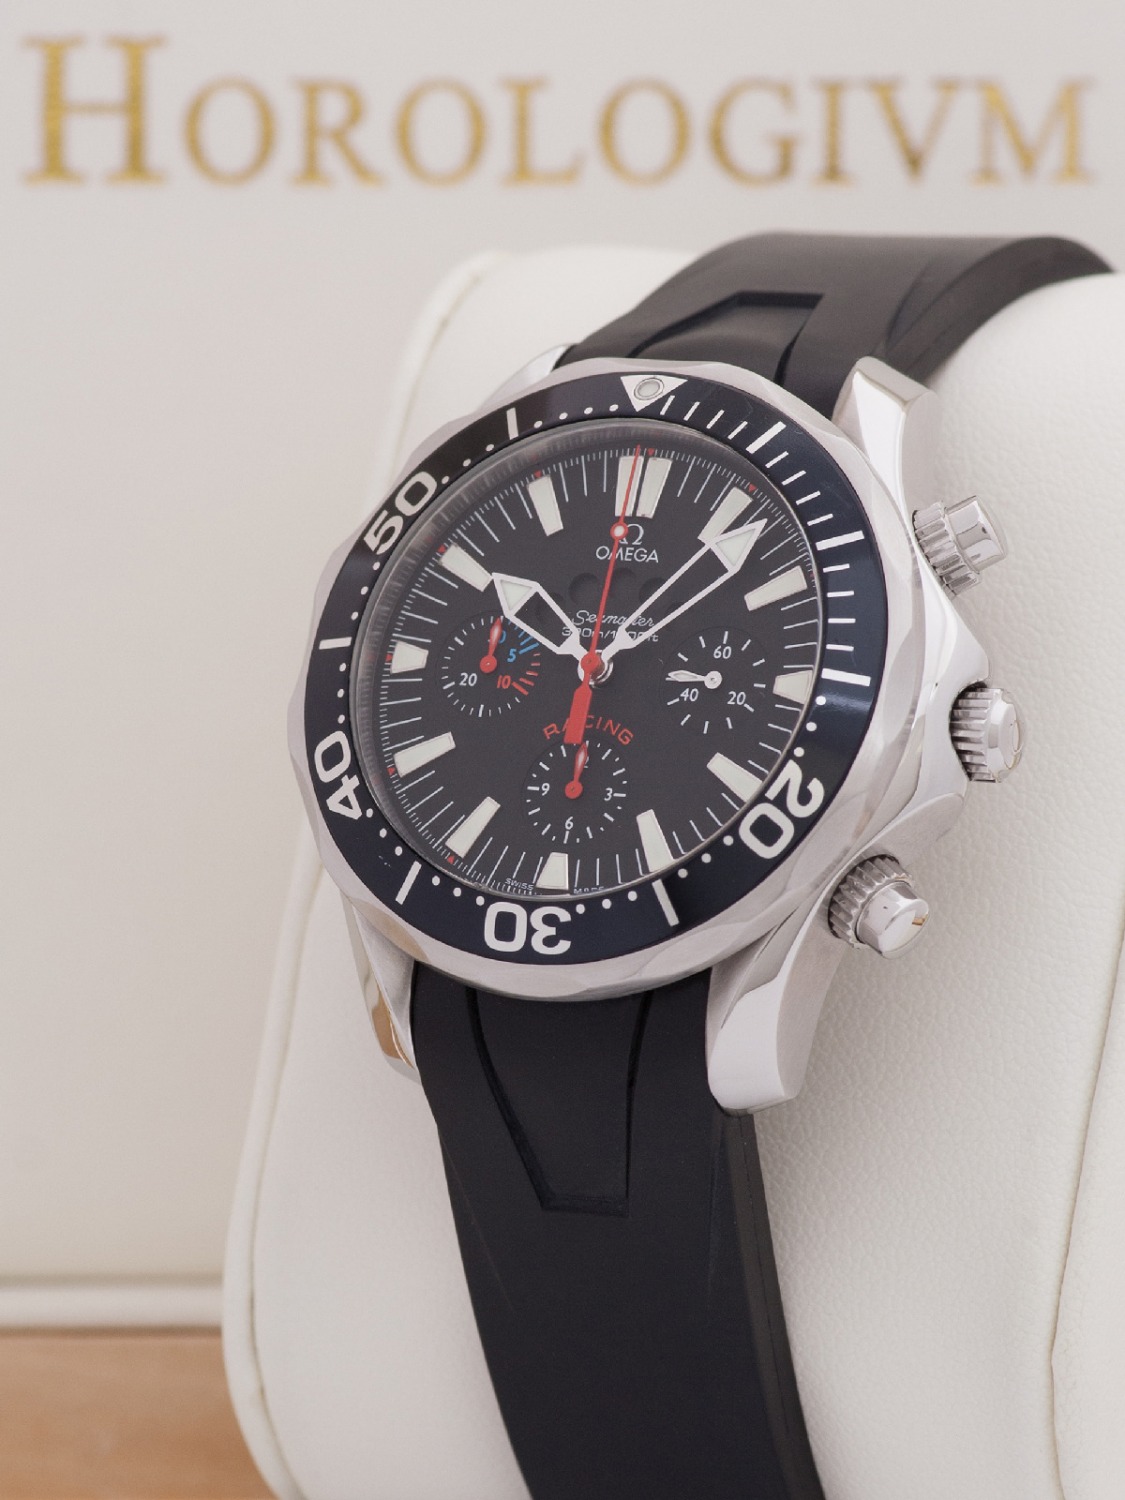 Omega Seamaster Racing Regatta Chronograph America's Cup watch, silver (case) and black (bezel)